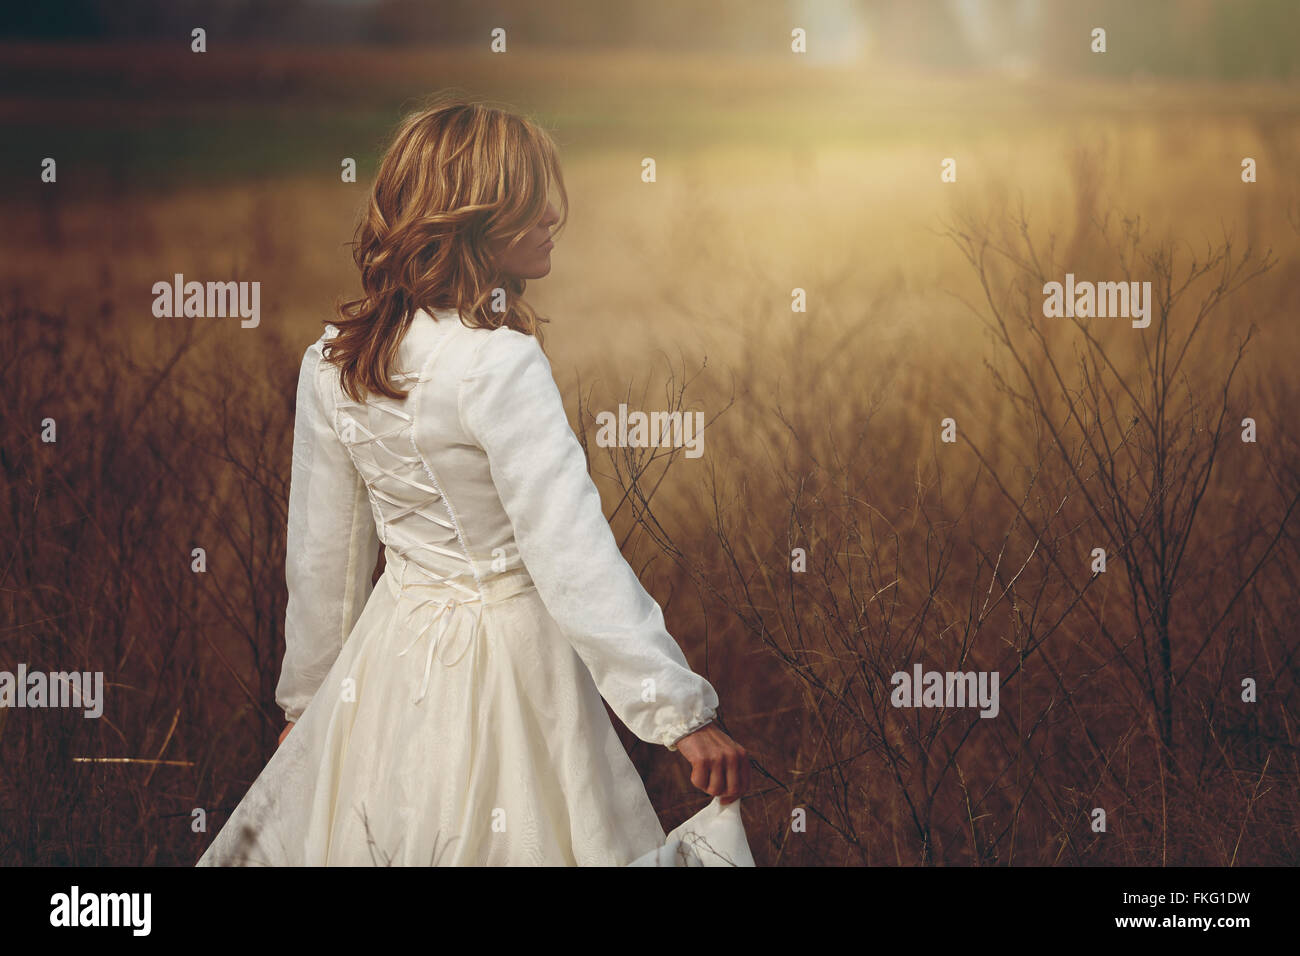 Beautiful woman walking in a field. Purity and innocence Stock Photo